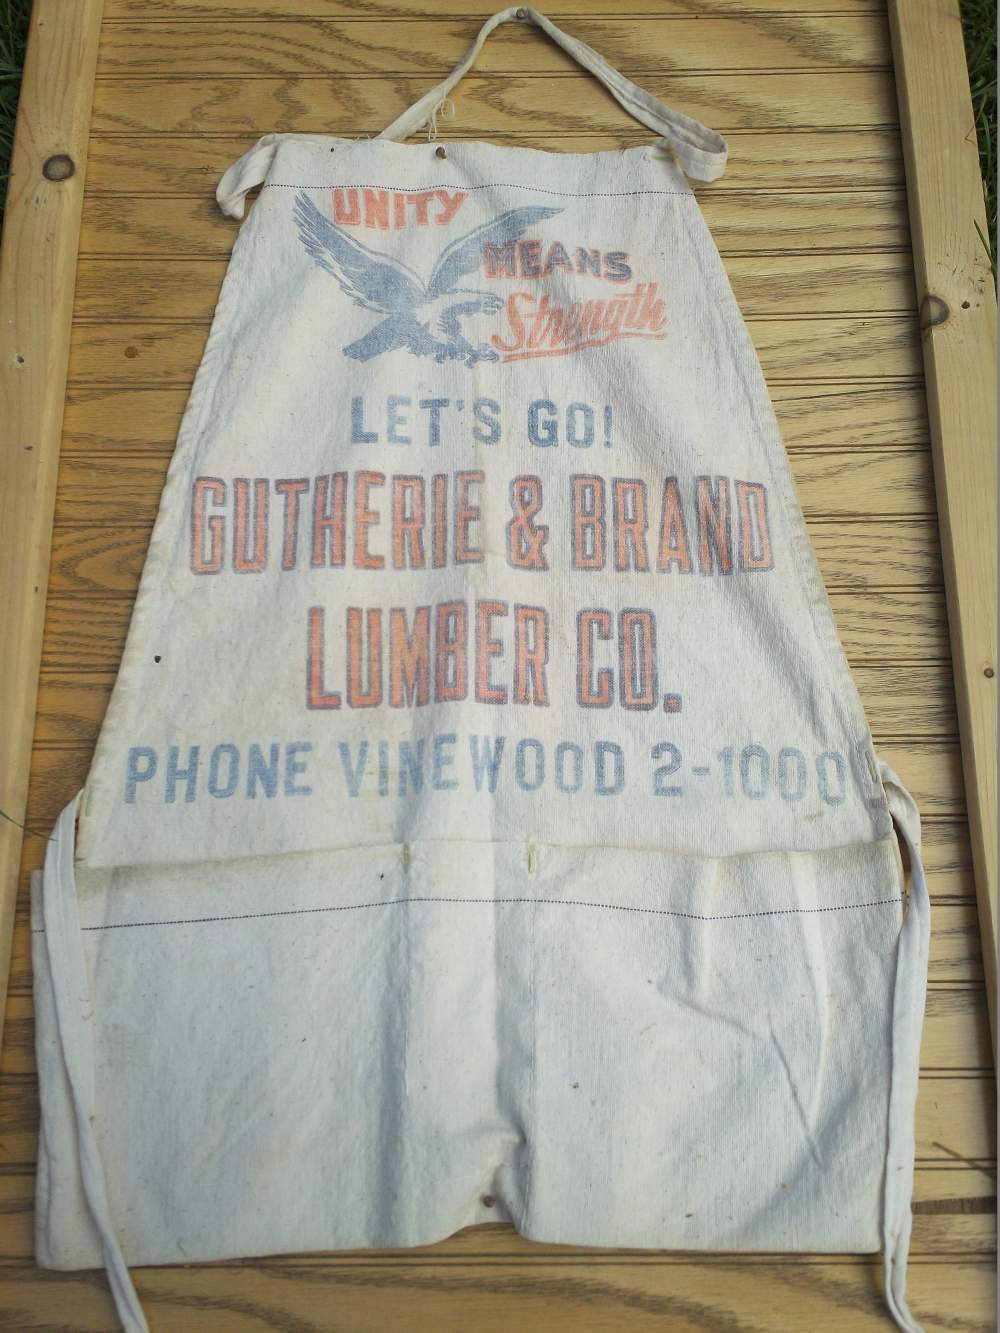 Name:  GLC Gutherie and Brand Lumber.jpg
Views: 799
Size:  142.7 KB